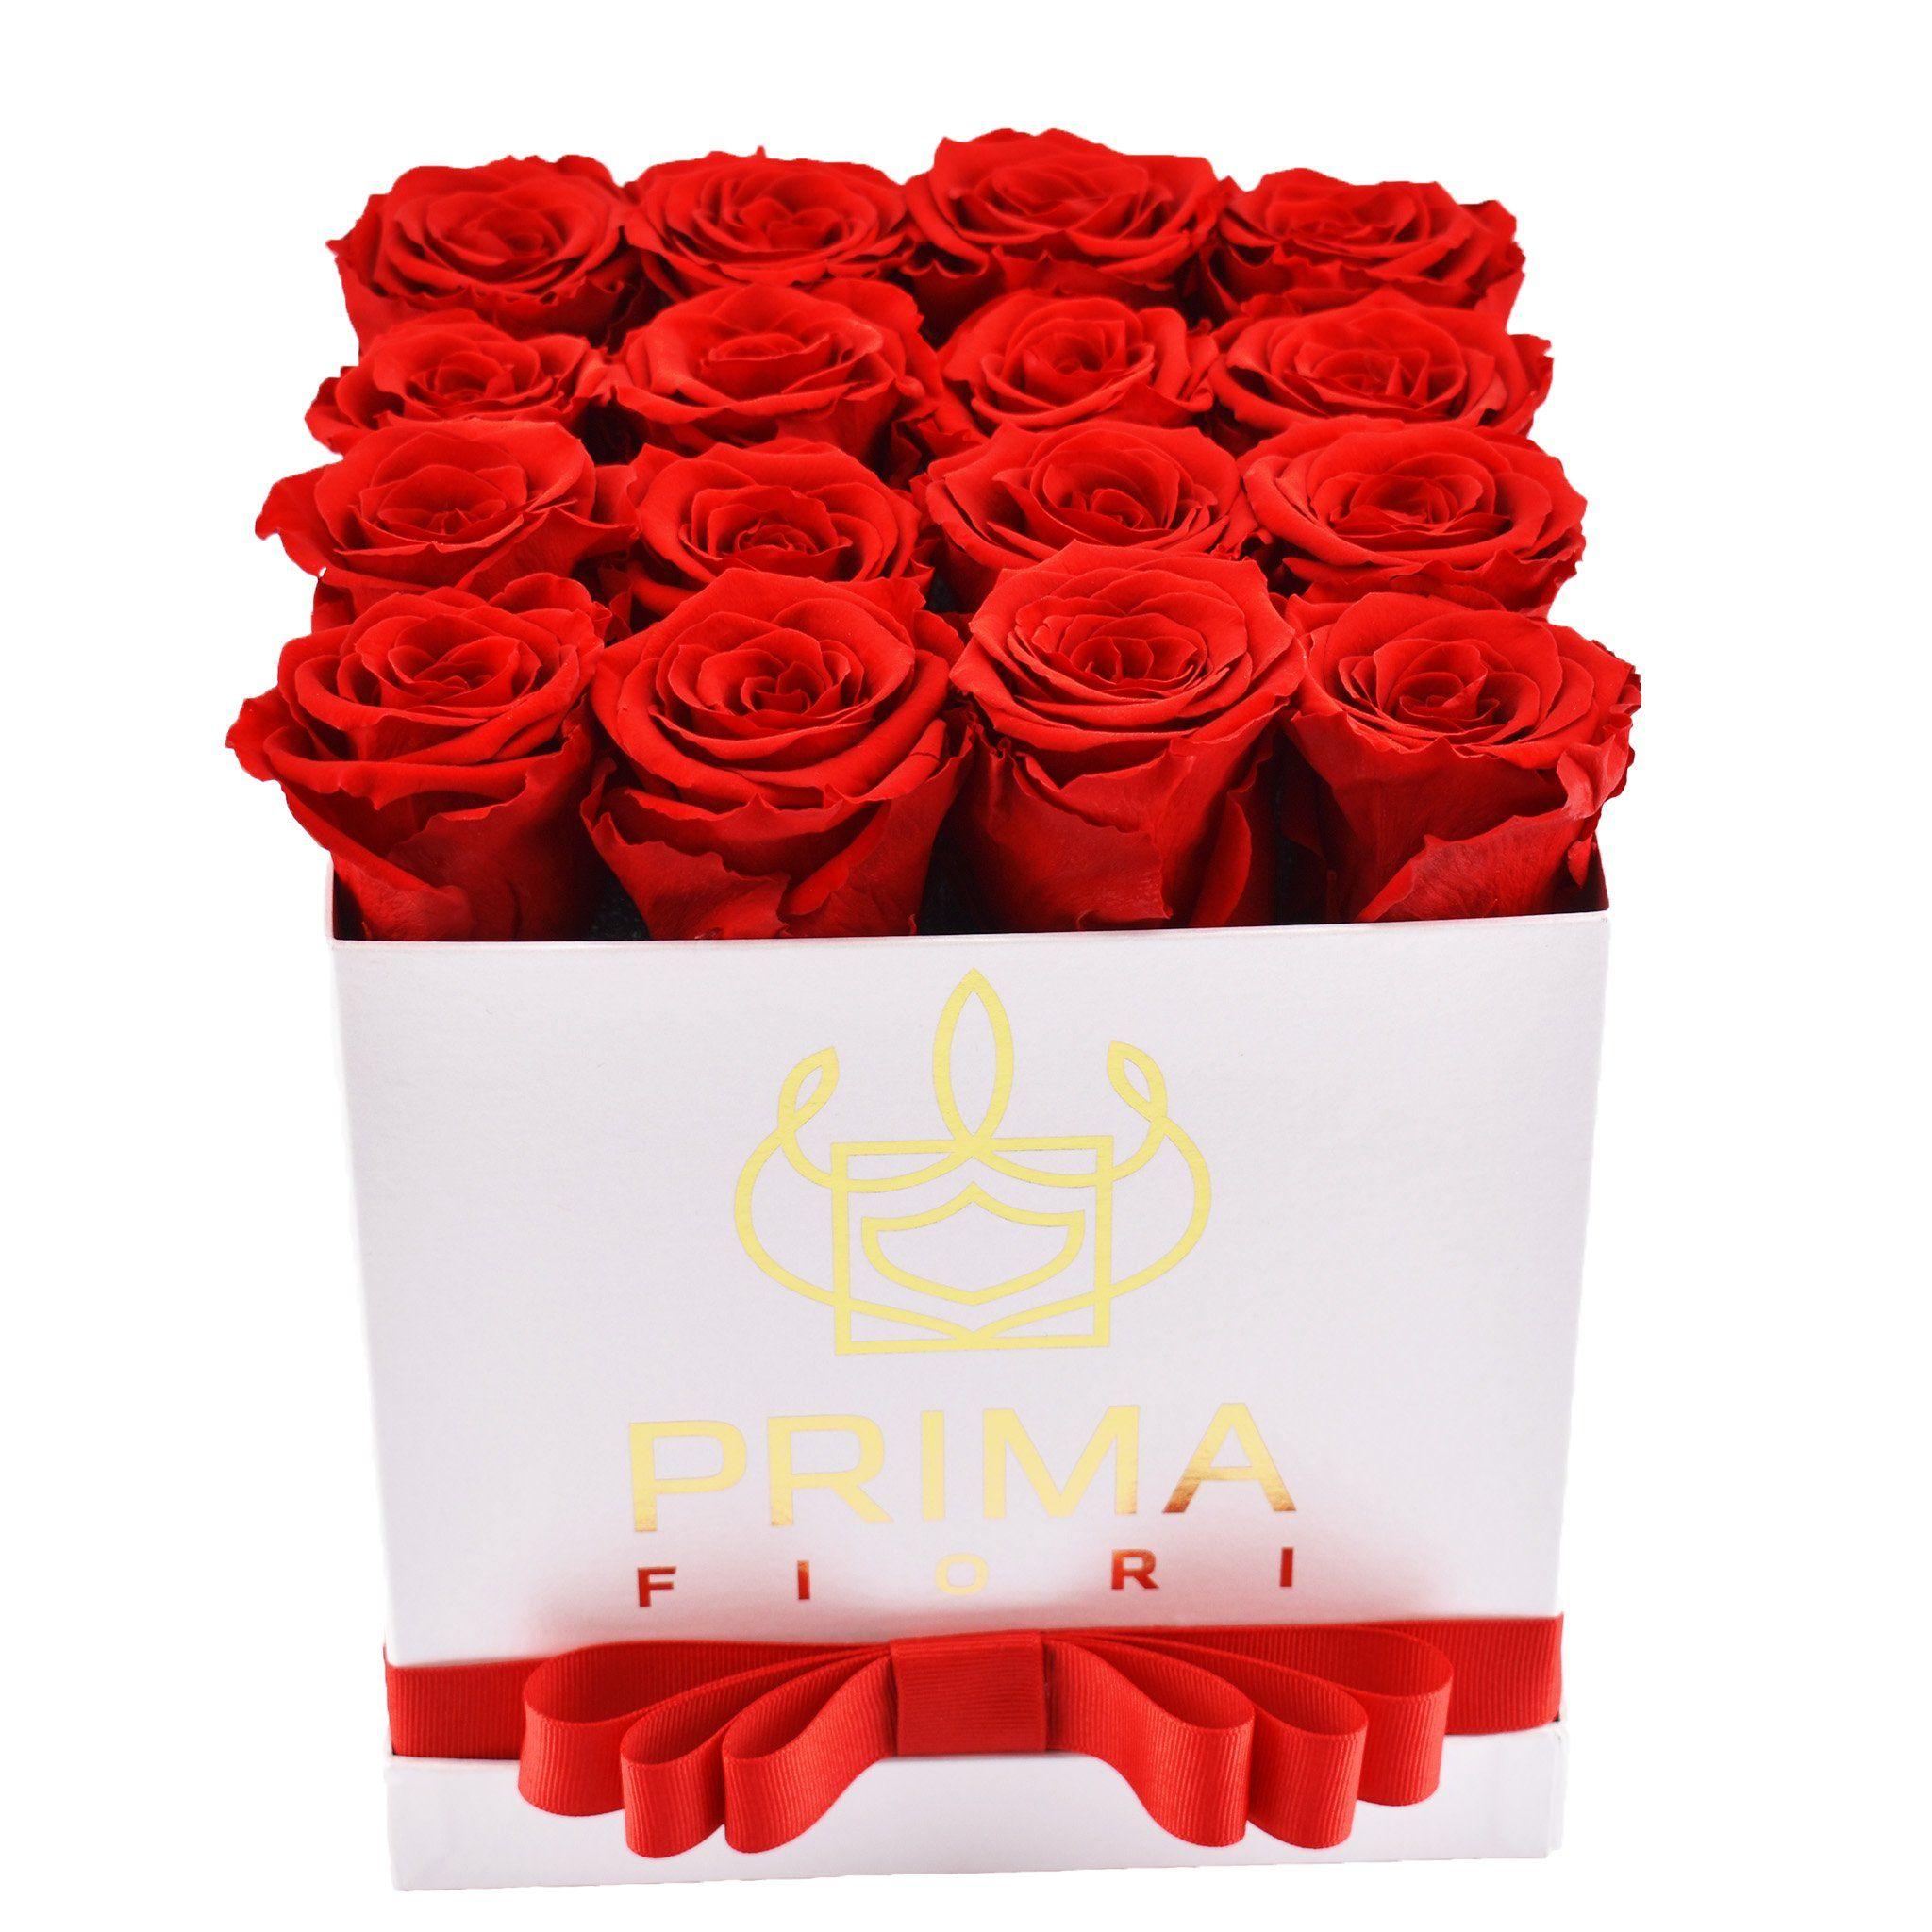 Red Box with White Square Logo - Red Preserved Roses. Medium White Square Box